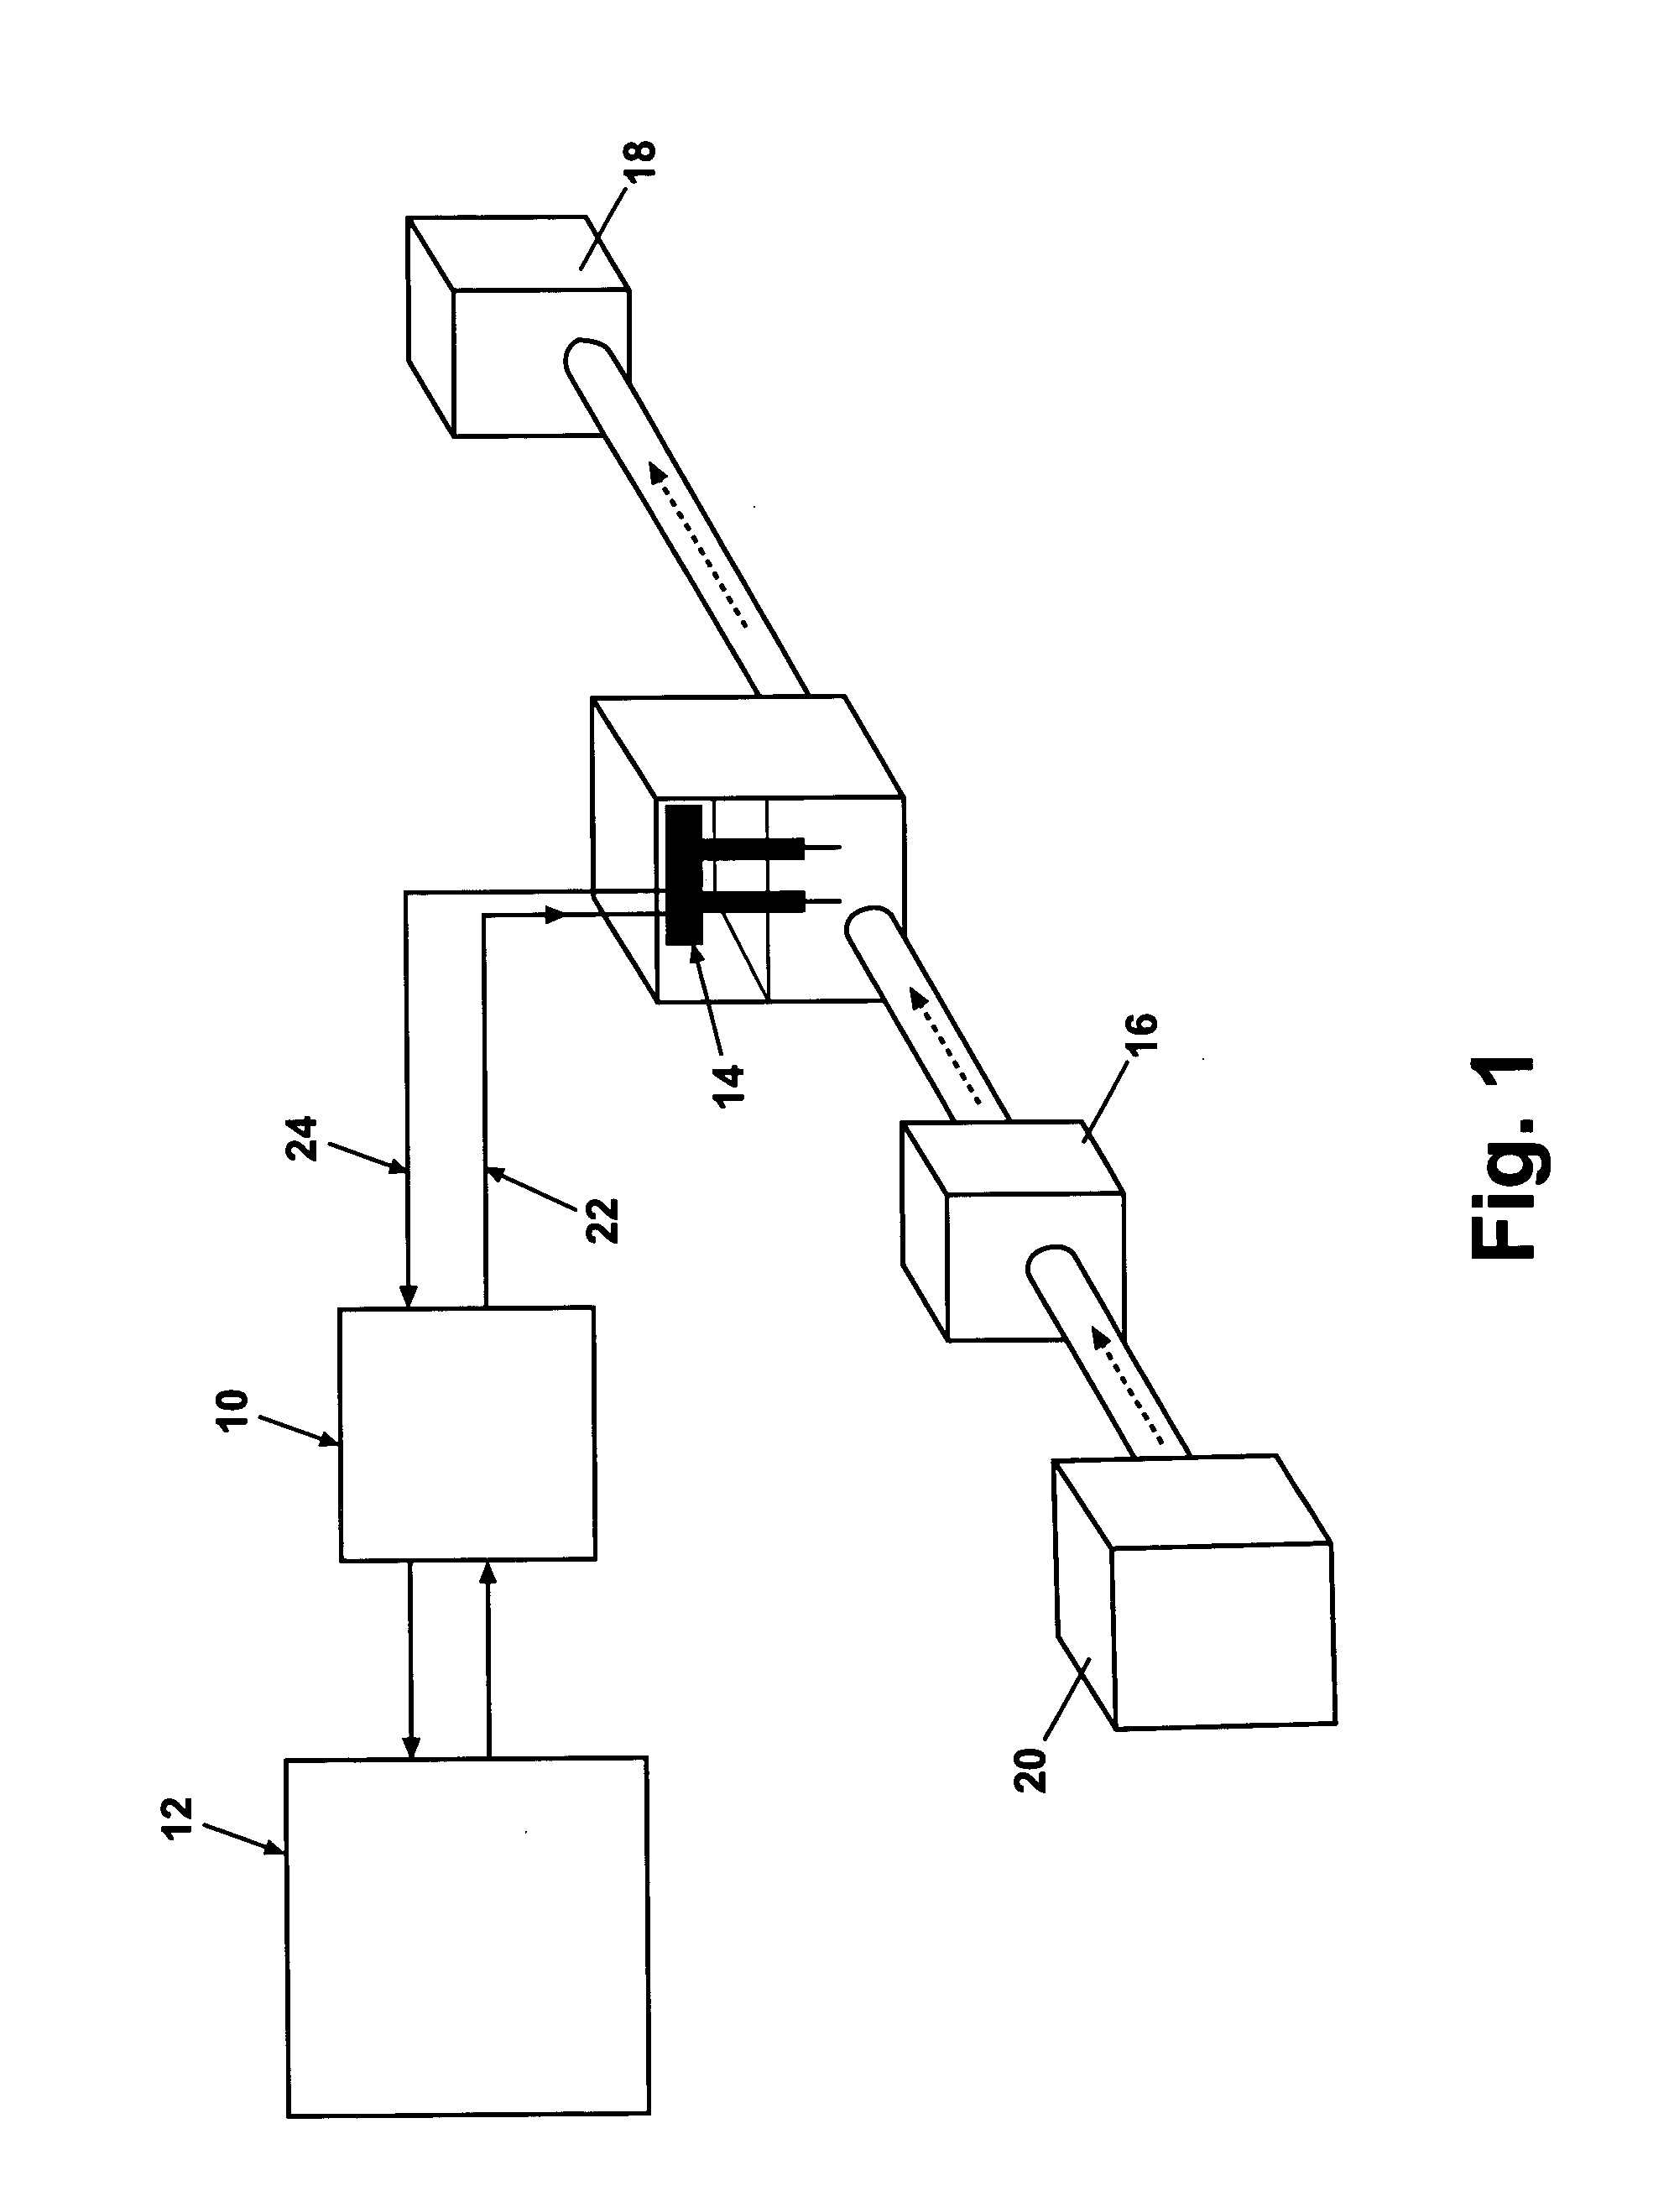 Water conductivity monitoring circuit for use with a steam generator